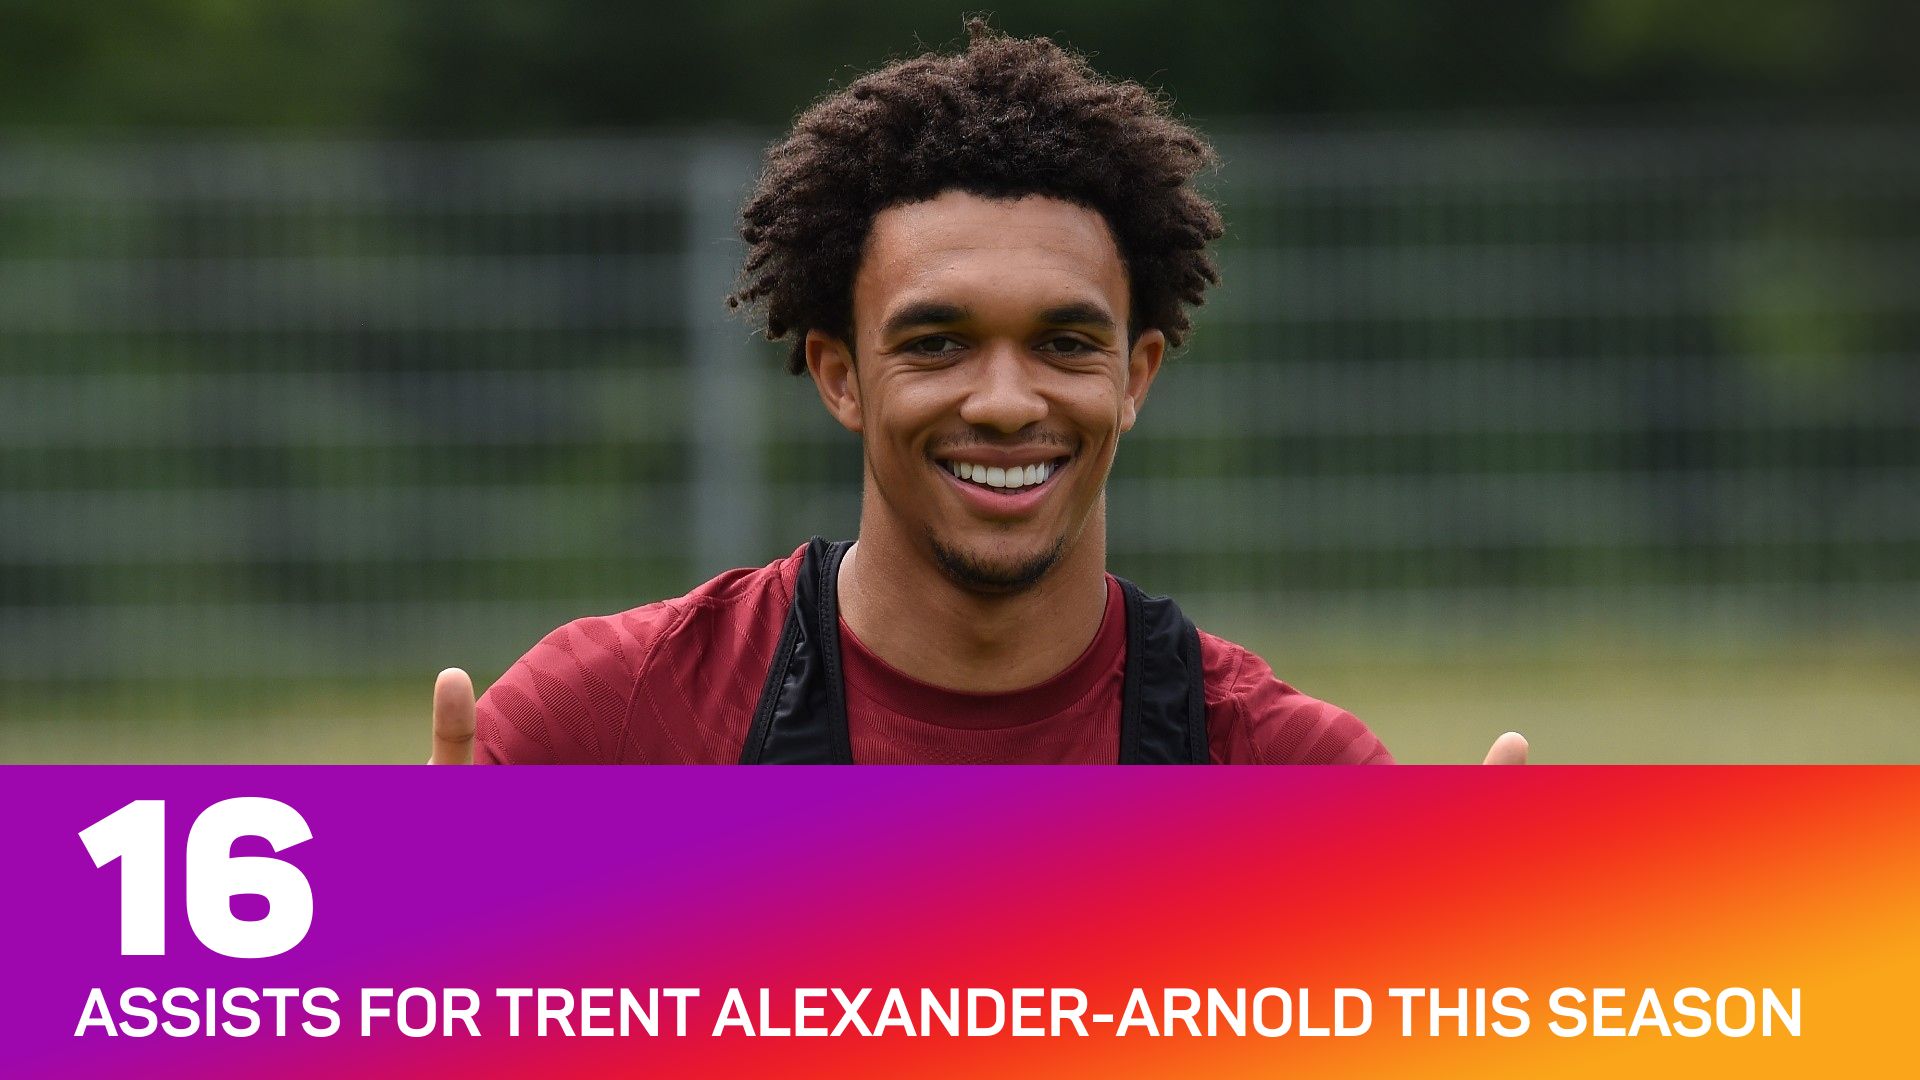 Trent Alexander-Arnold has 16 assists this season